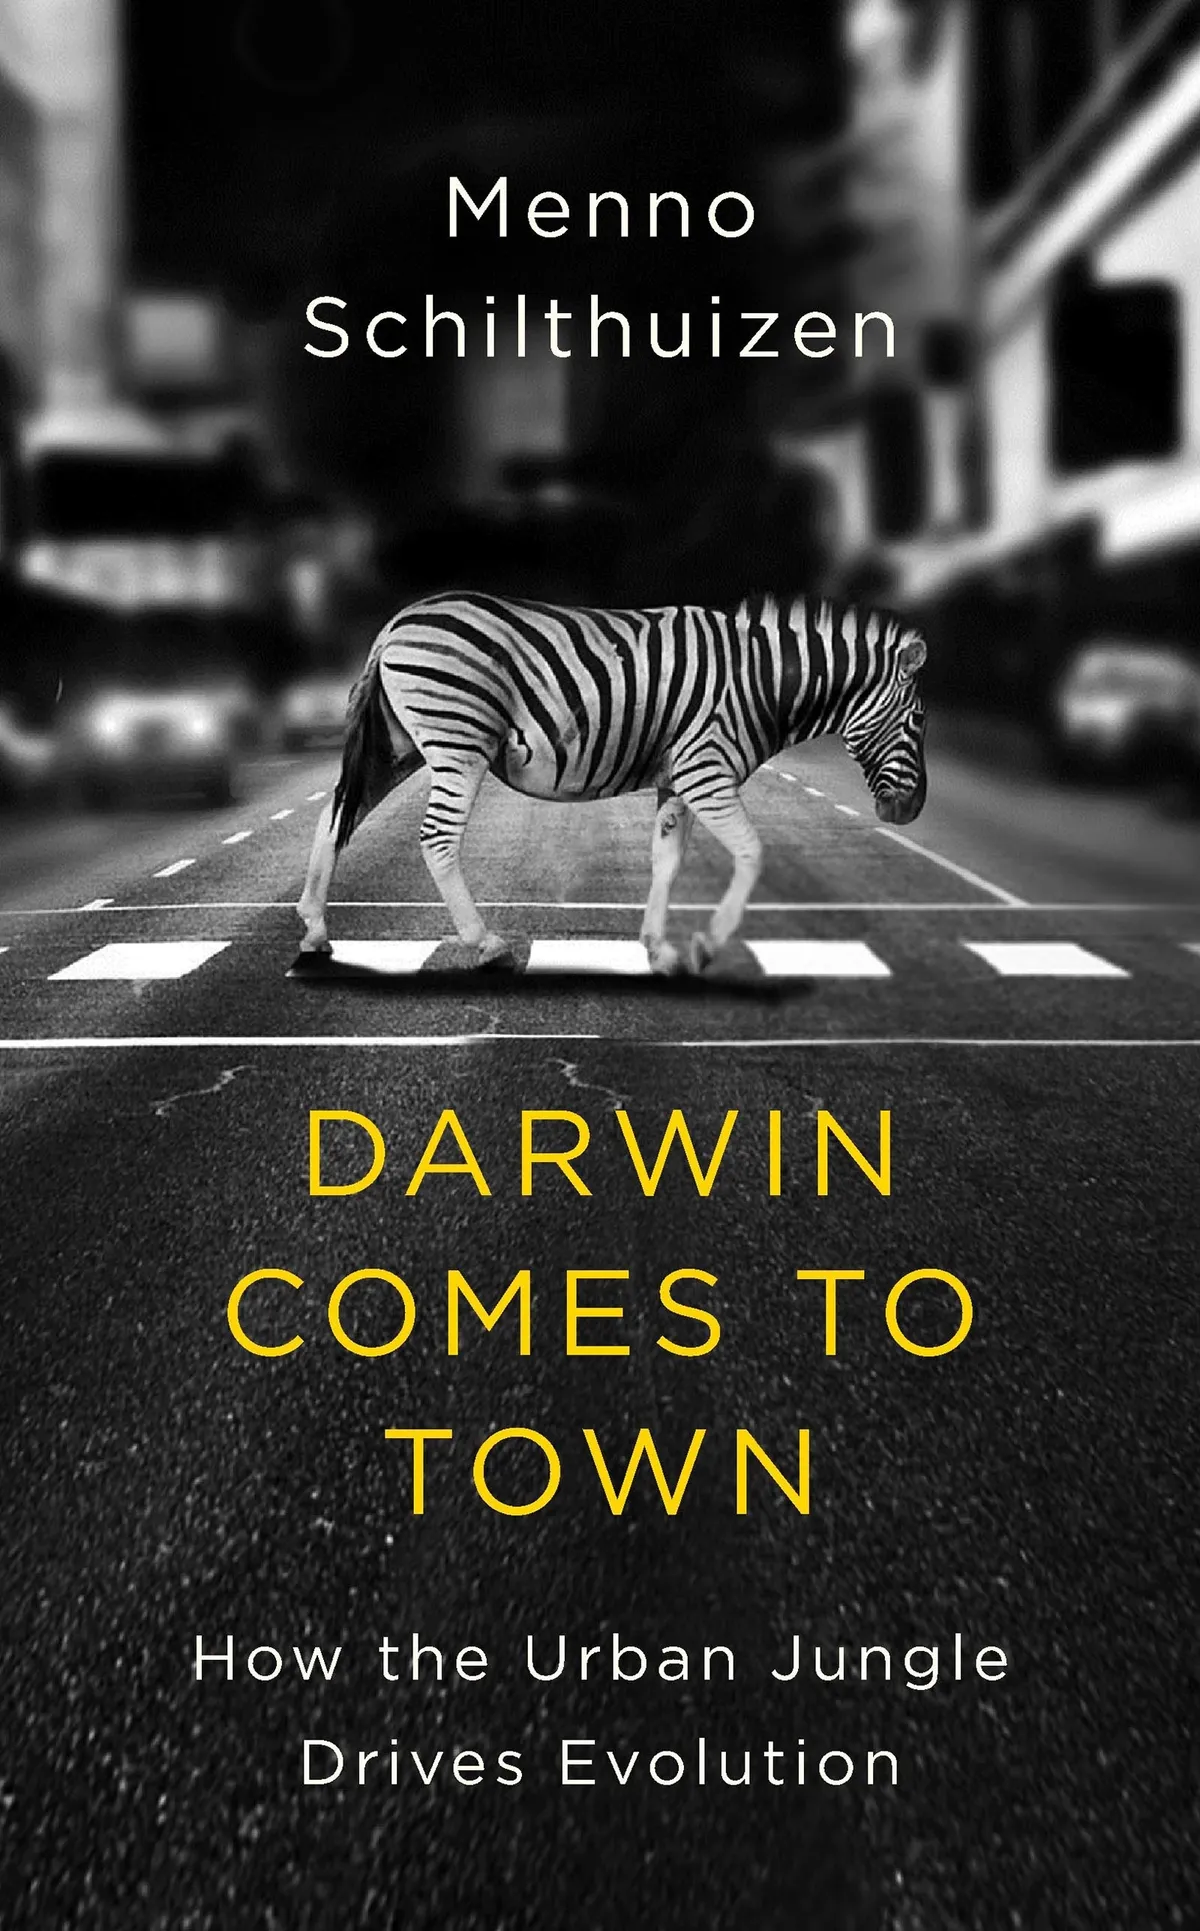 Darwin Comes to Town by Menno Schilthuizen is out now (£20 hardback, £8.99 paperback, Quercus)